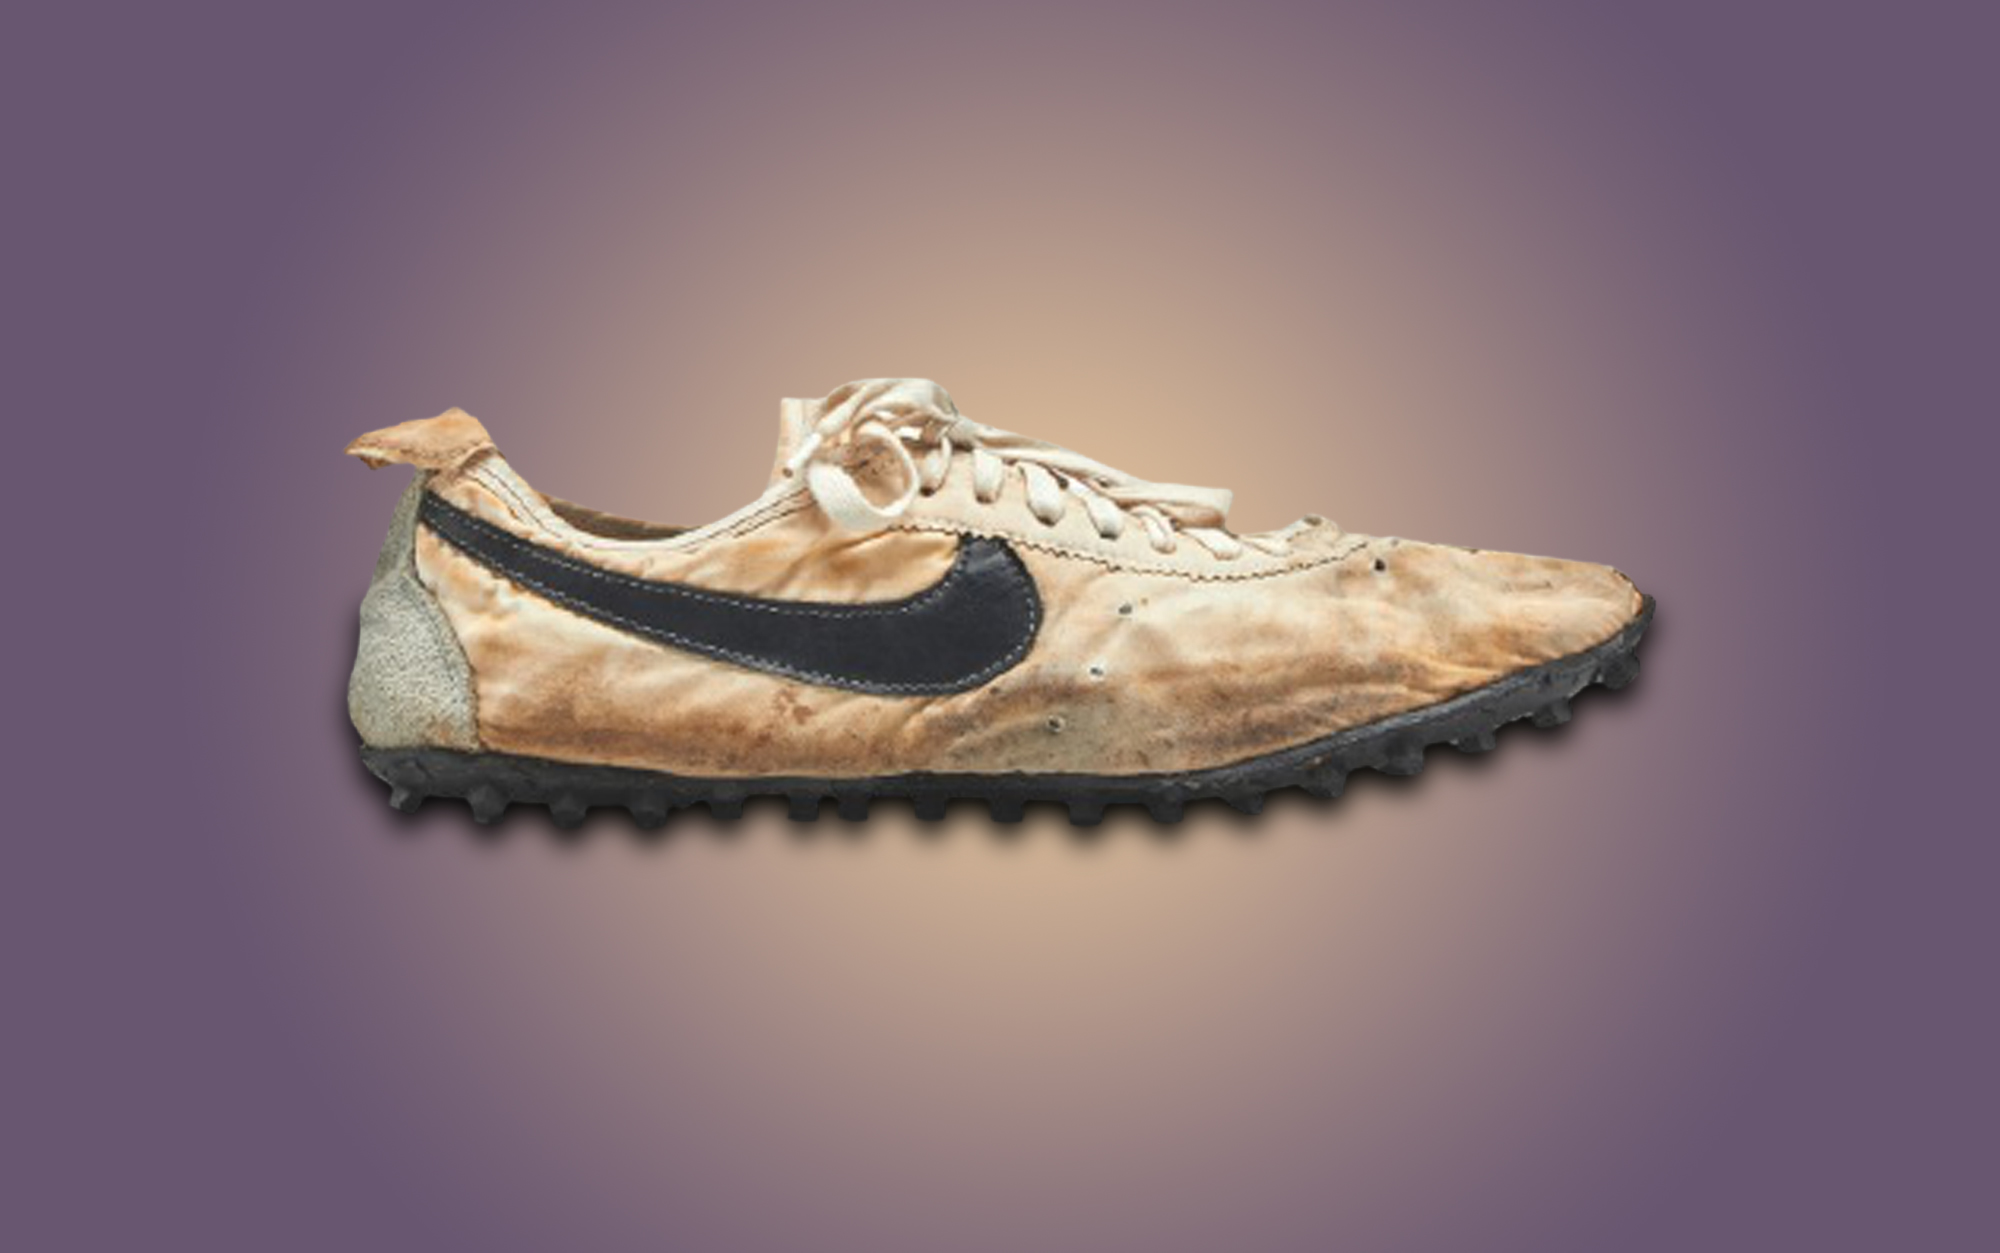 Nike Waffle Racing Shoes” - | GODLY SOLES